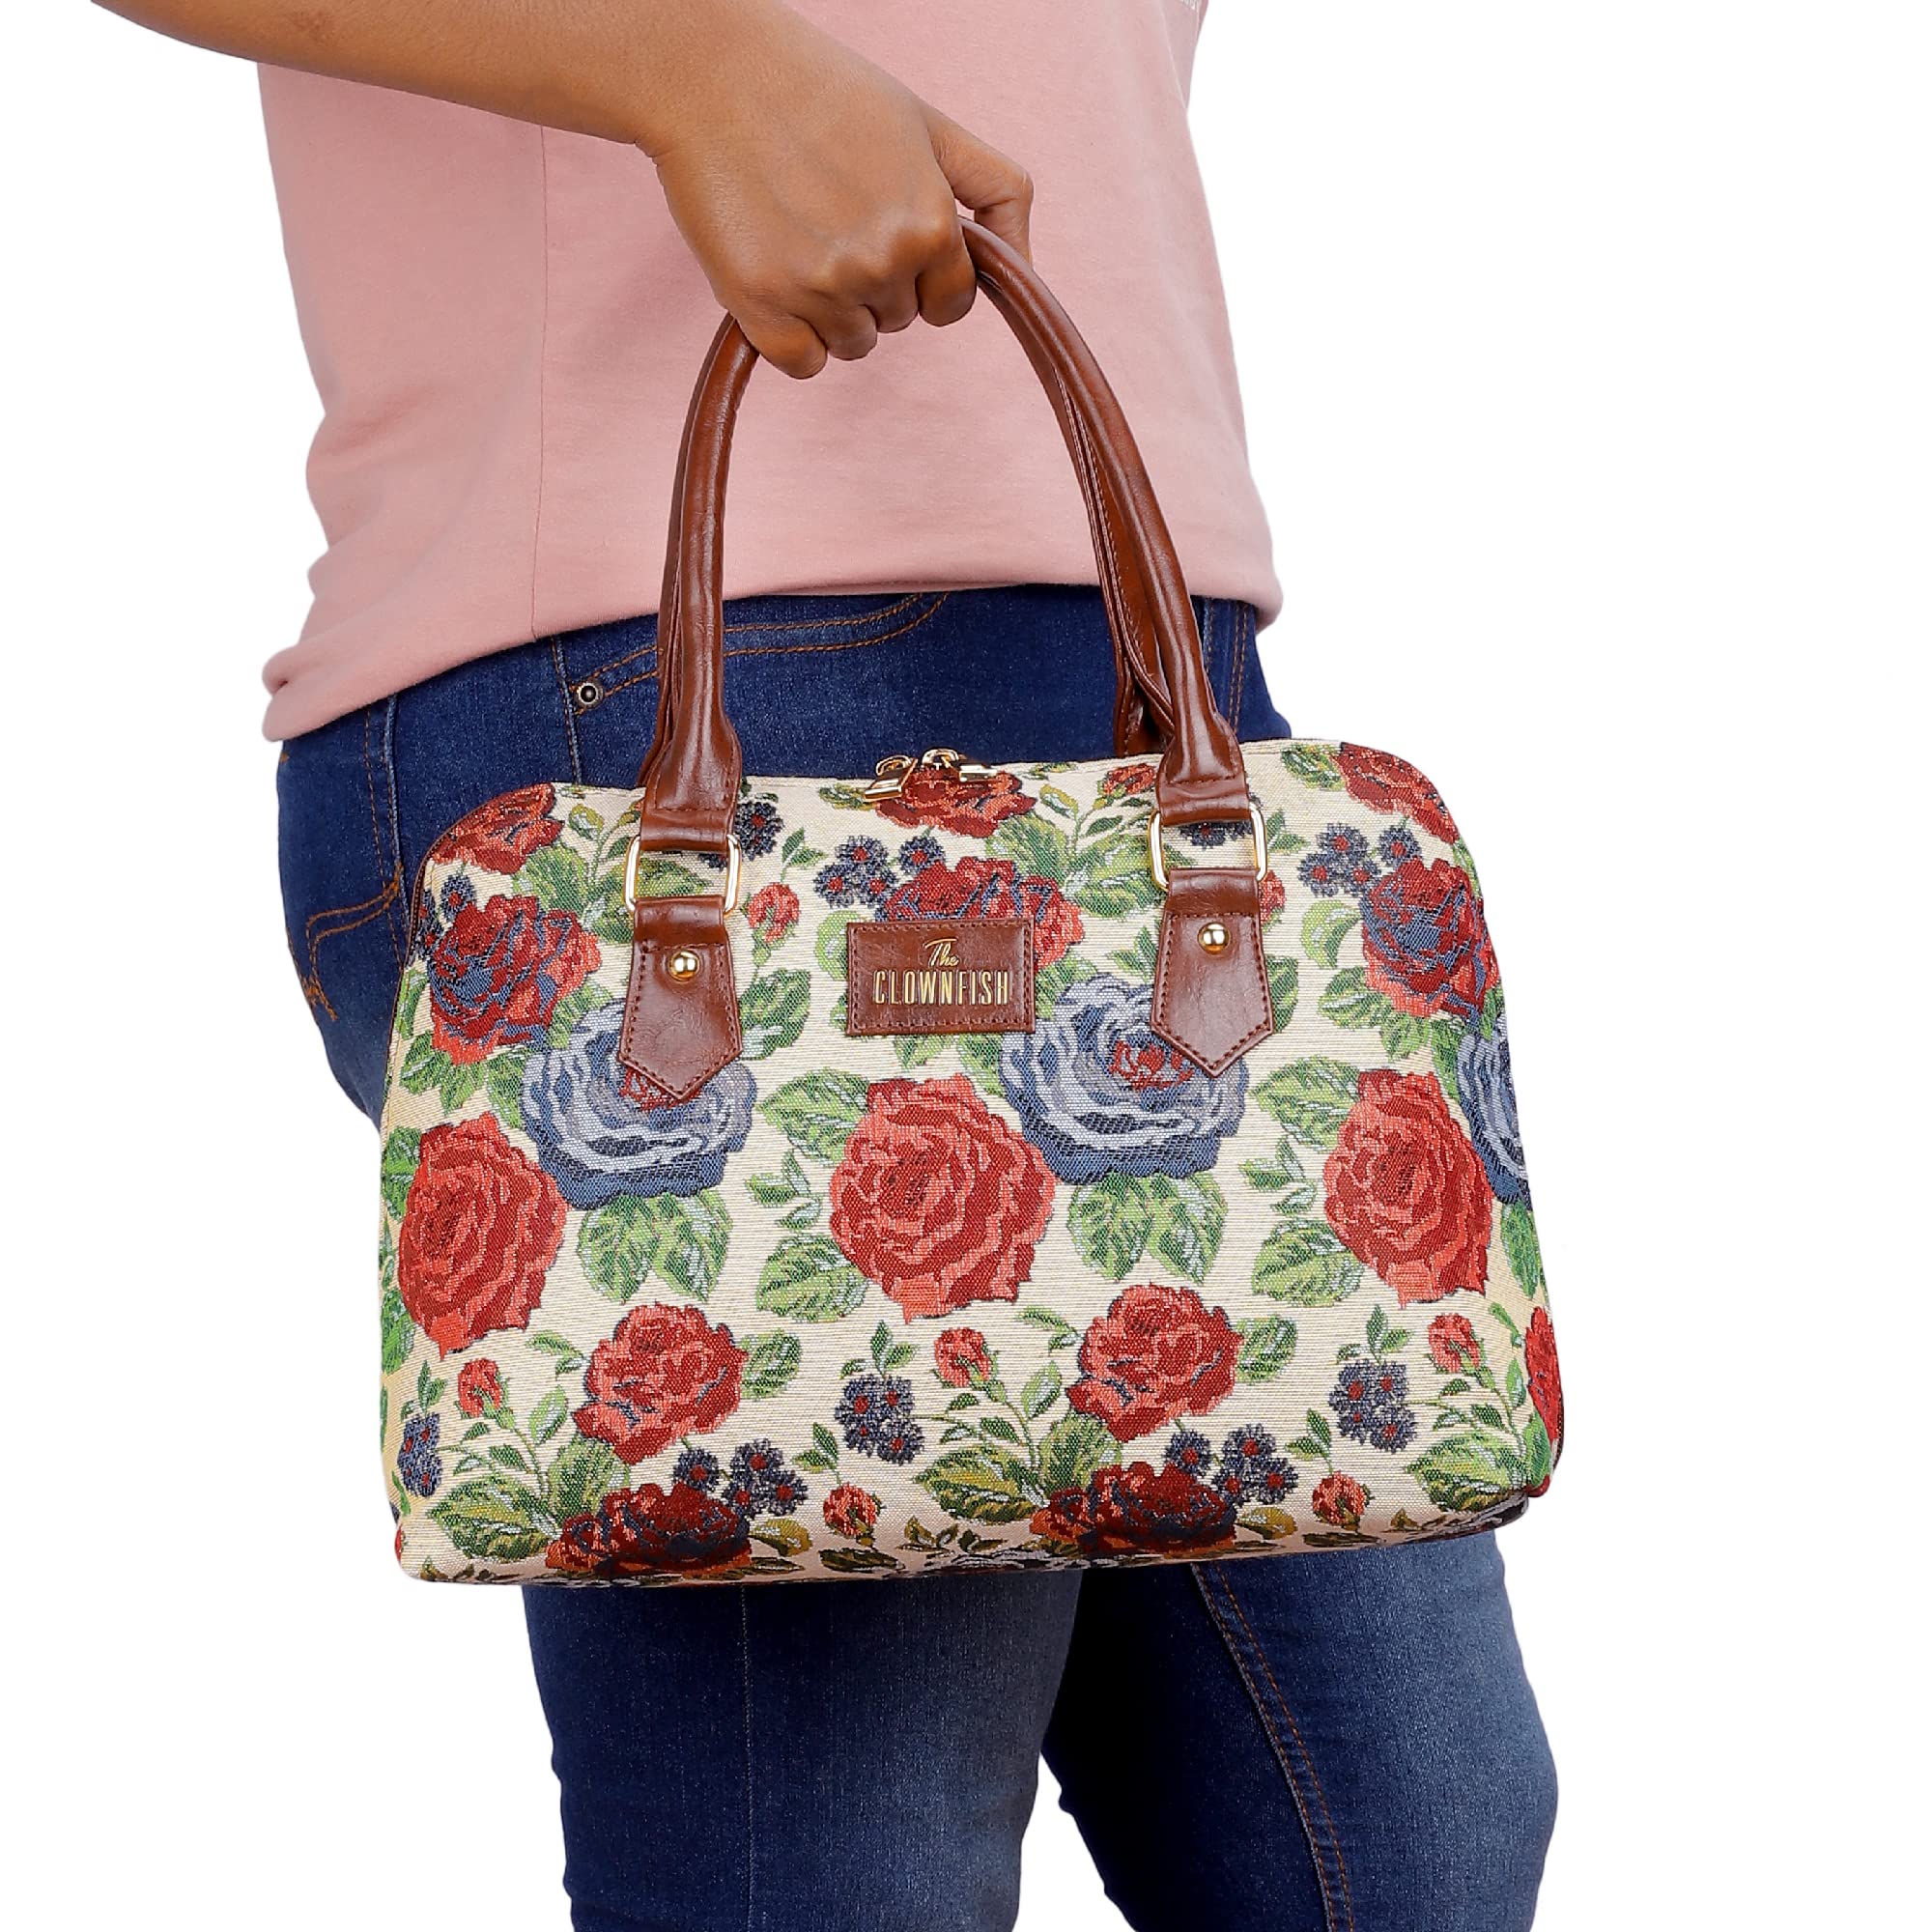 women's handbag Shopping Bag, Floral Print Mandala Bag Beach Towel Carrier  Bags, New Ladies Purse in Valsad at best price by Shalimar Collection -  Justdial